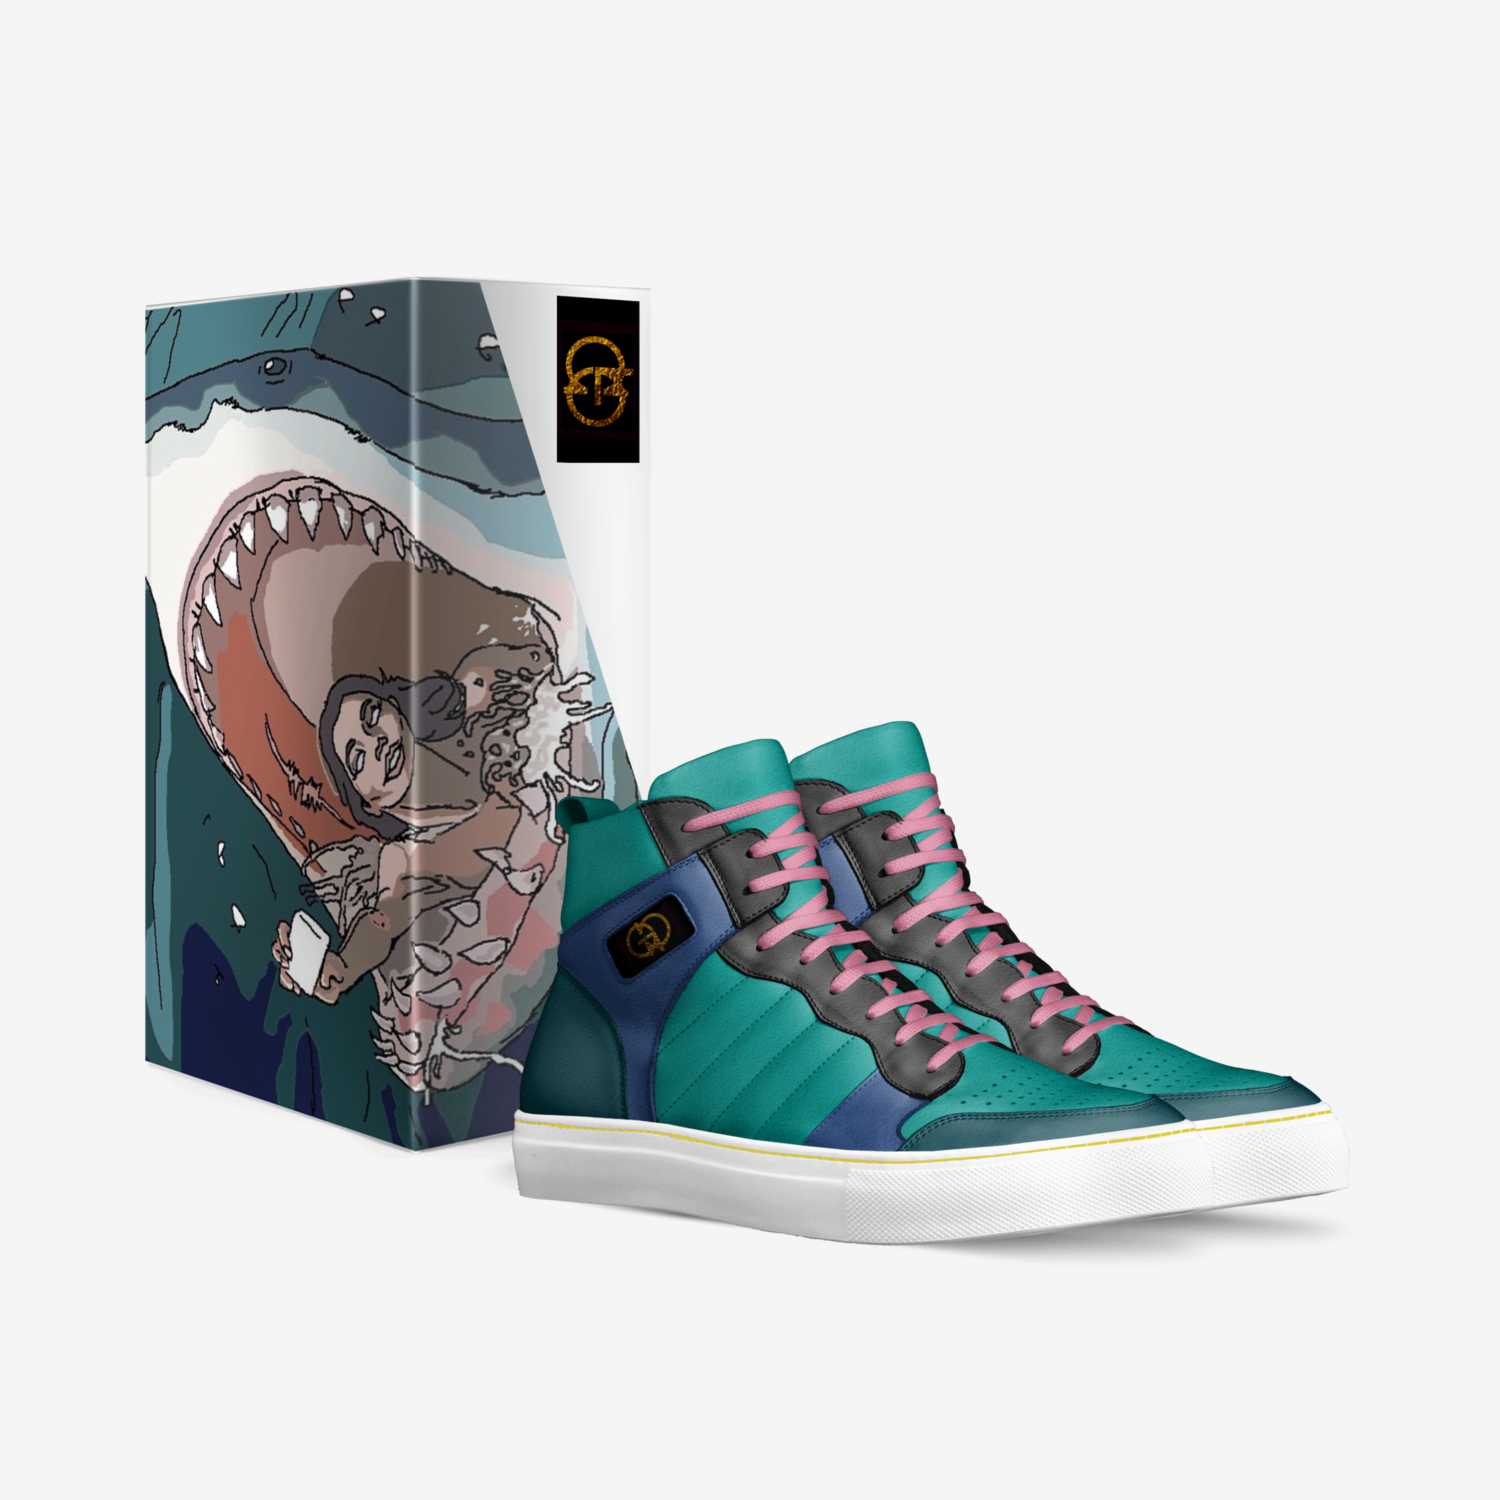 Selfie Sharks custom made in Italy shoes by Savage Image | Box view